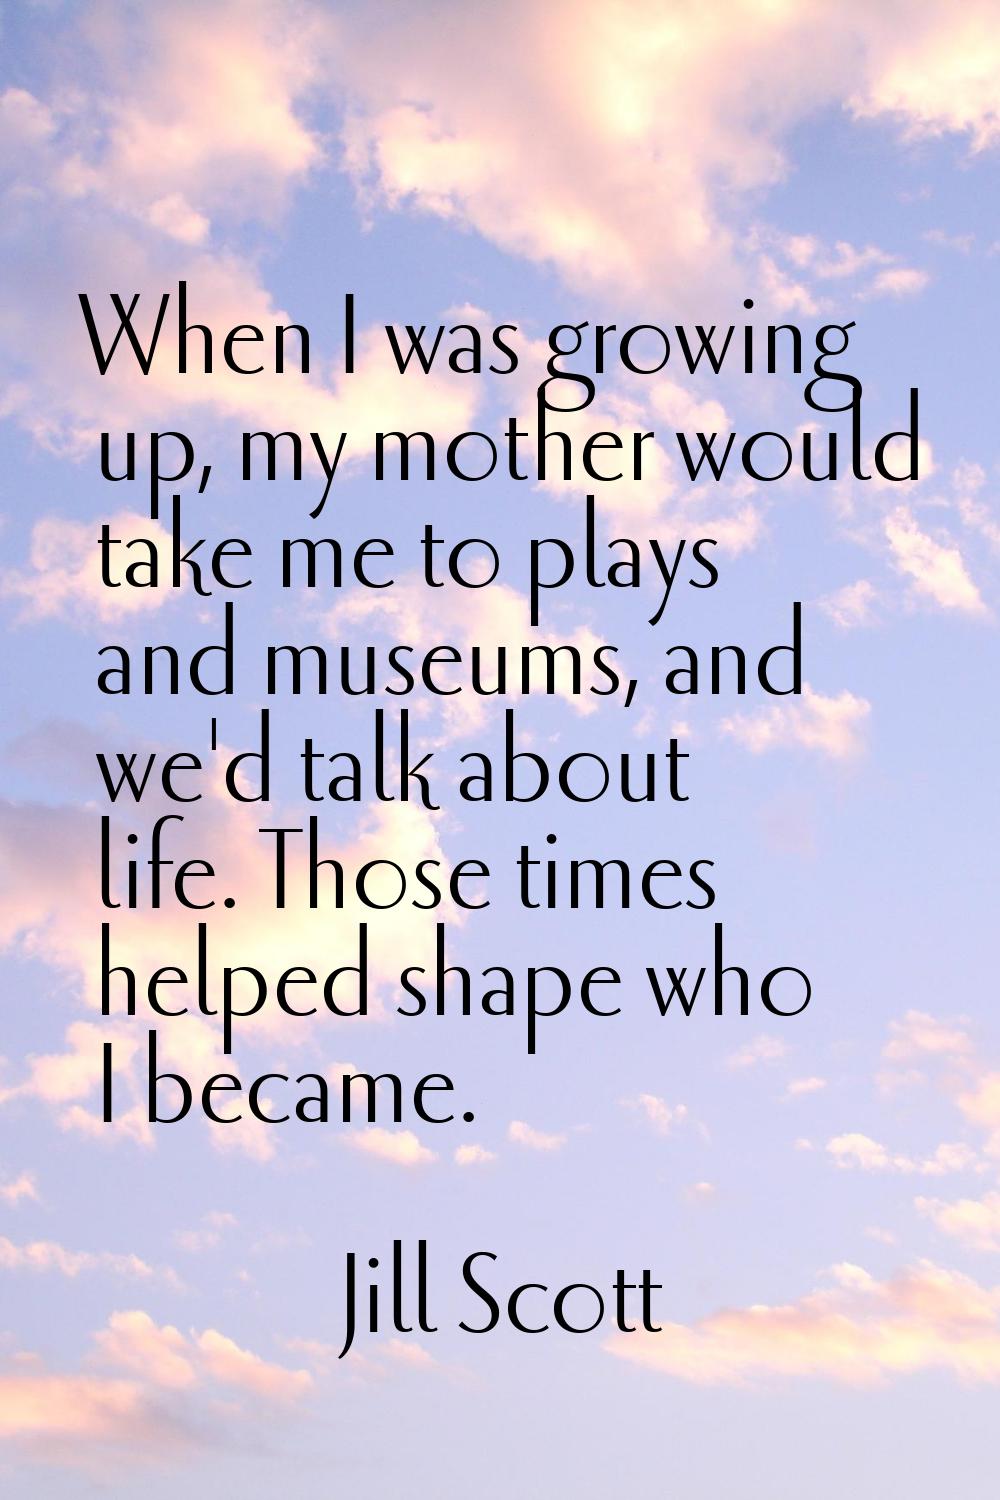 When I was growing up, my mother would take me to plays and museums, and we'd talk about life. Thos